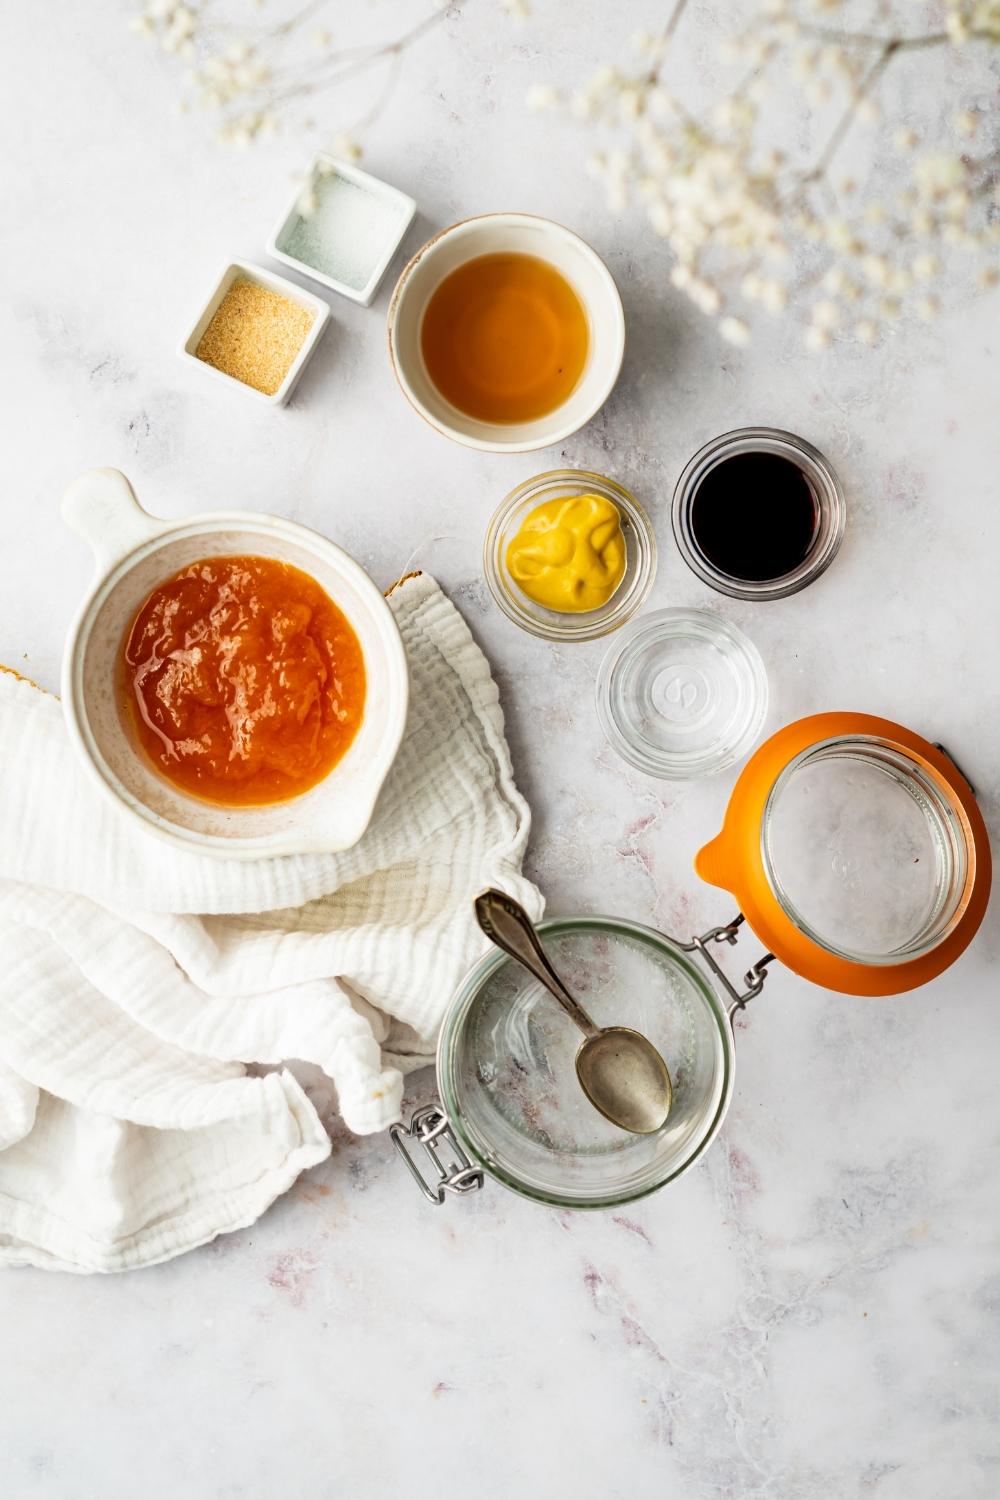 A bowl of apricot, a bowl of honey, a bowl of mustard, a bowl of soy sauce, and an empty glass jar all on a grey counter.